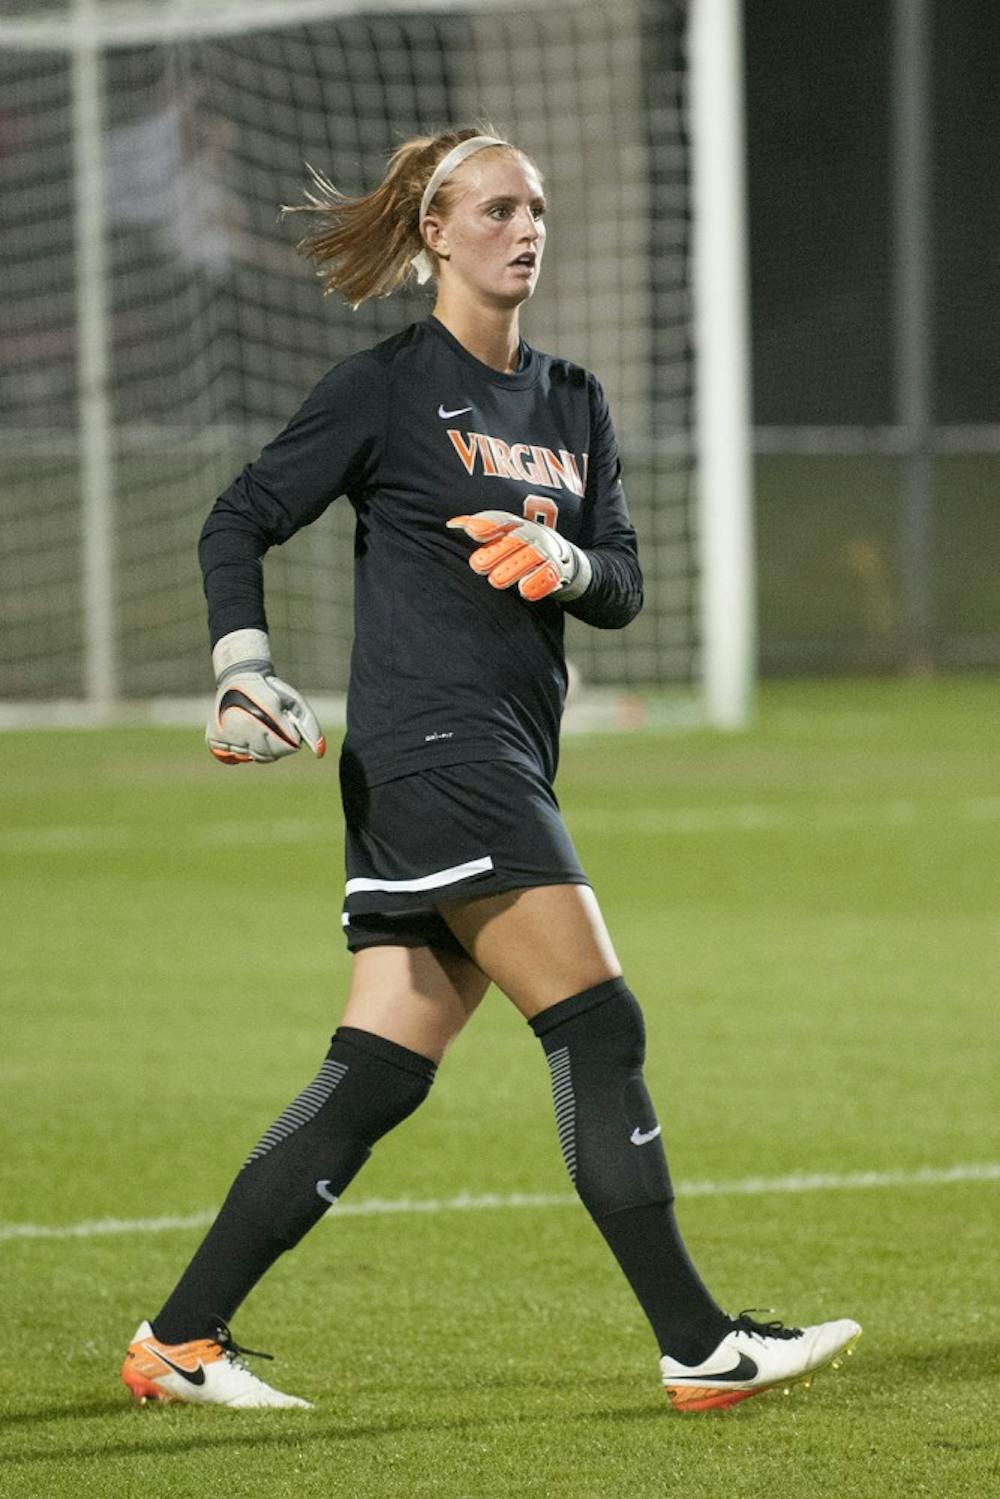 <p>Senior goalie Morgan Stearns has been the cornerstone of the Cavaliers' defense this season, and she'll need to continue her stellar play if they look to advance in the NCAA Tournament.&nbsp;</p>